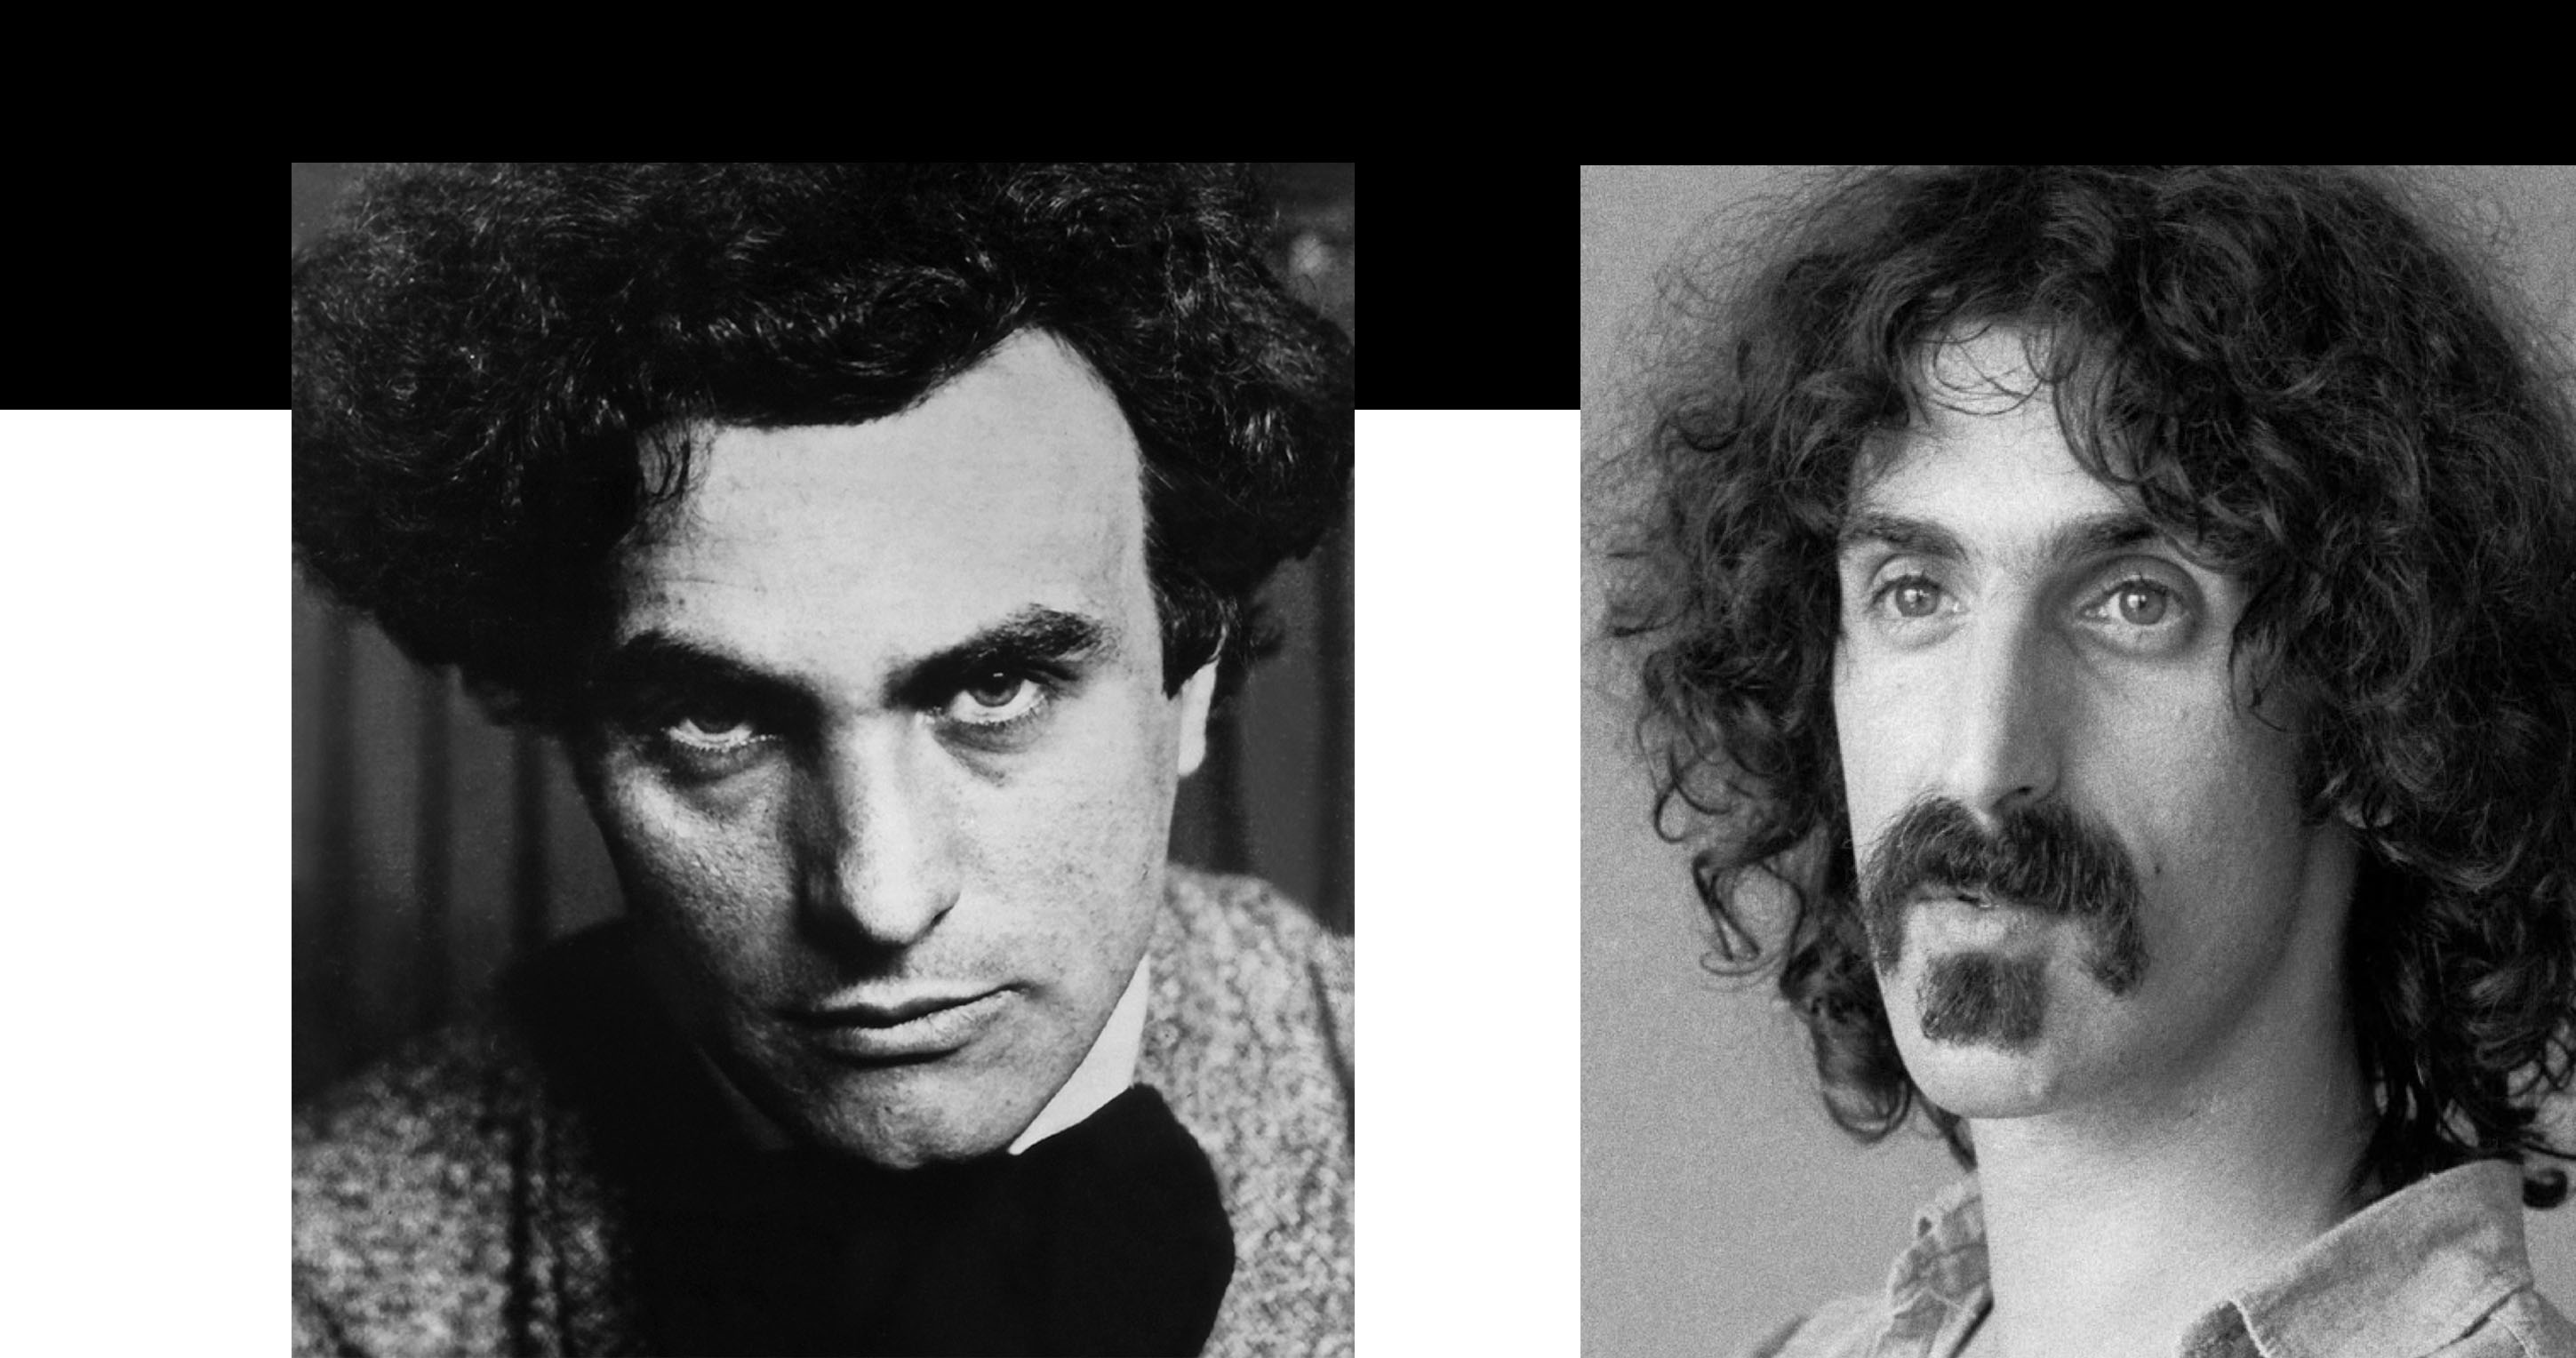 Left to right: Edgard Varèse and Frank Zappa